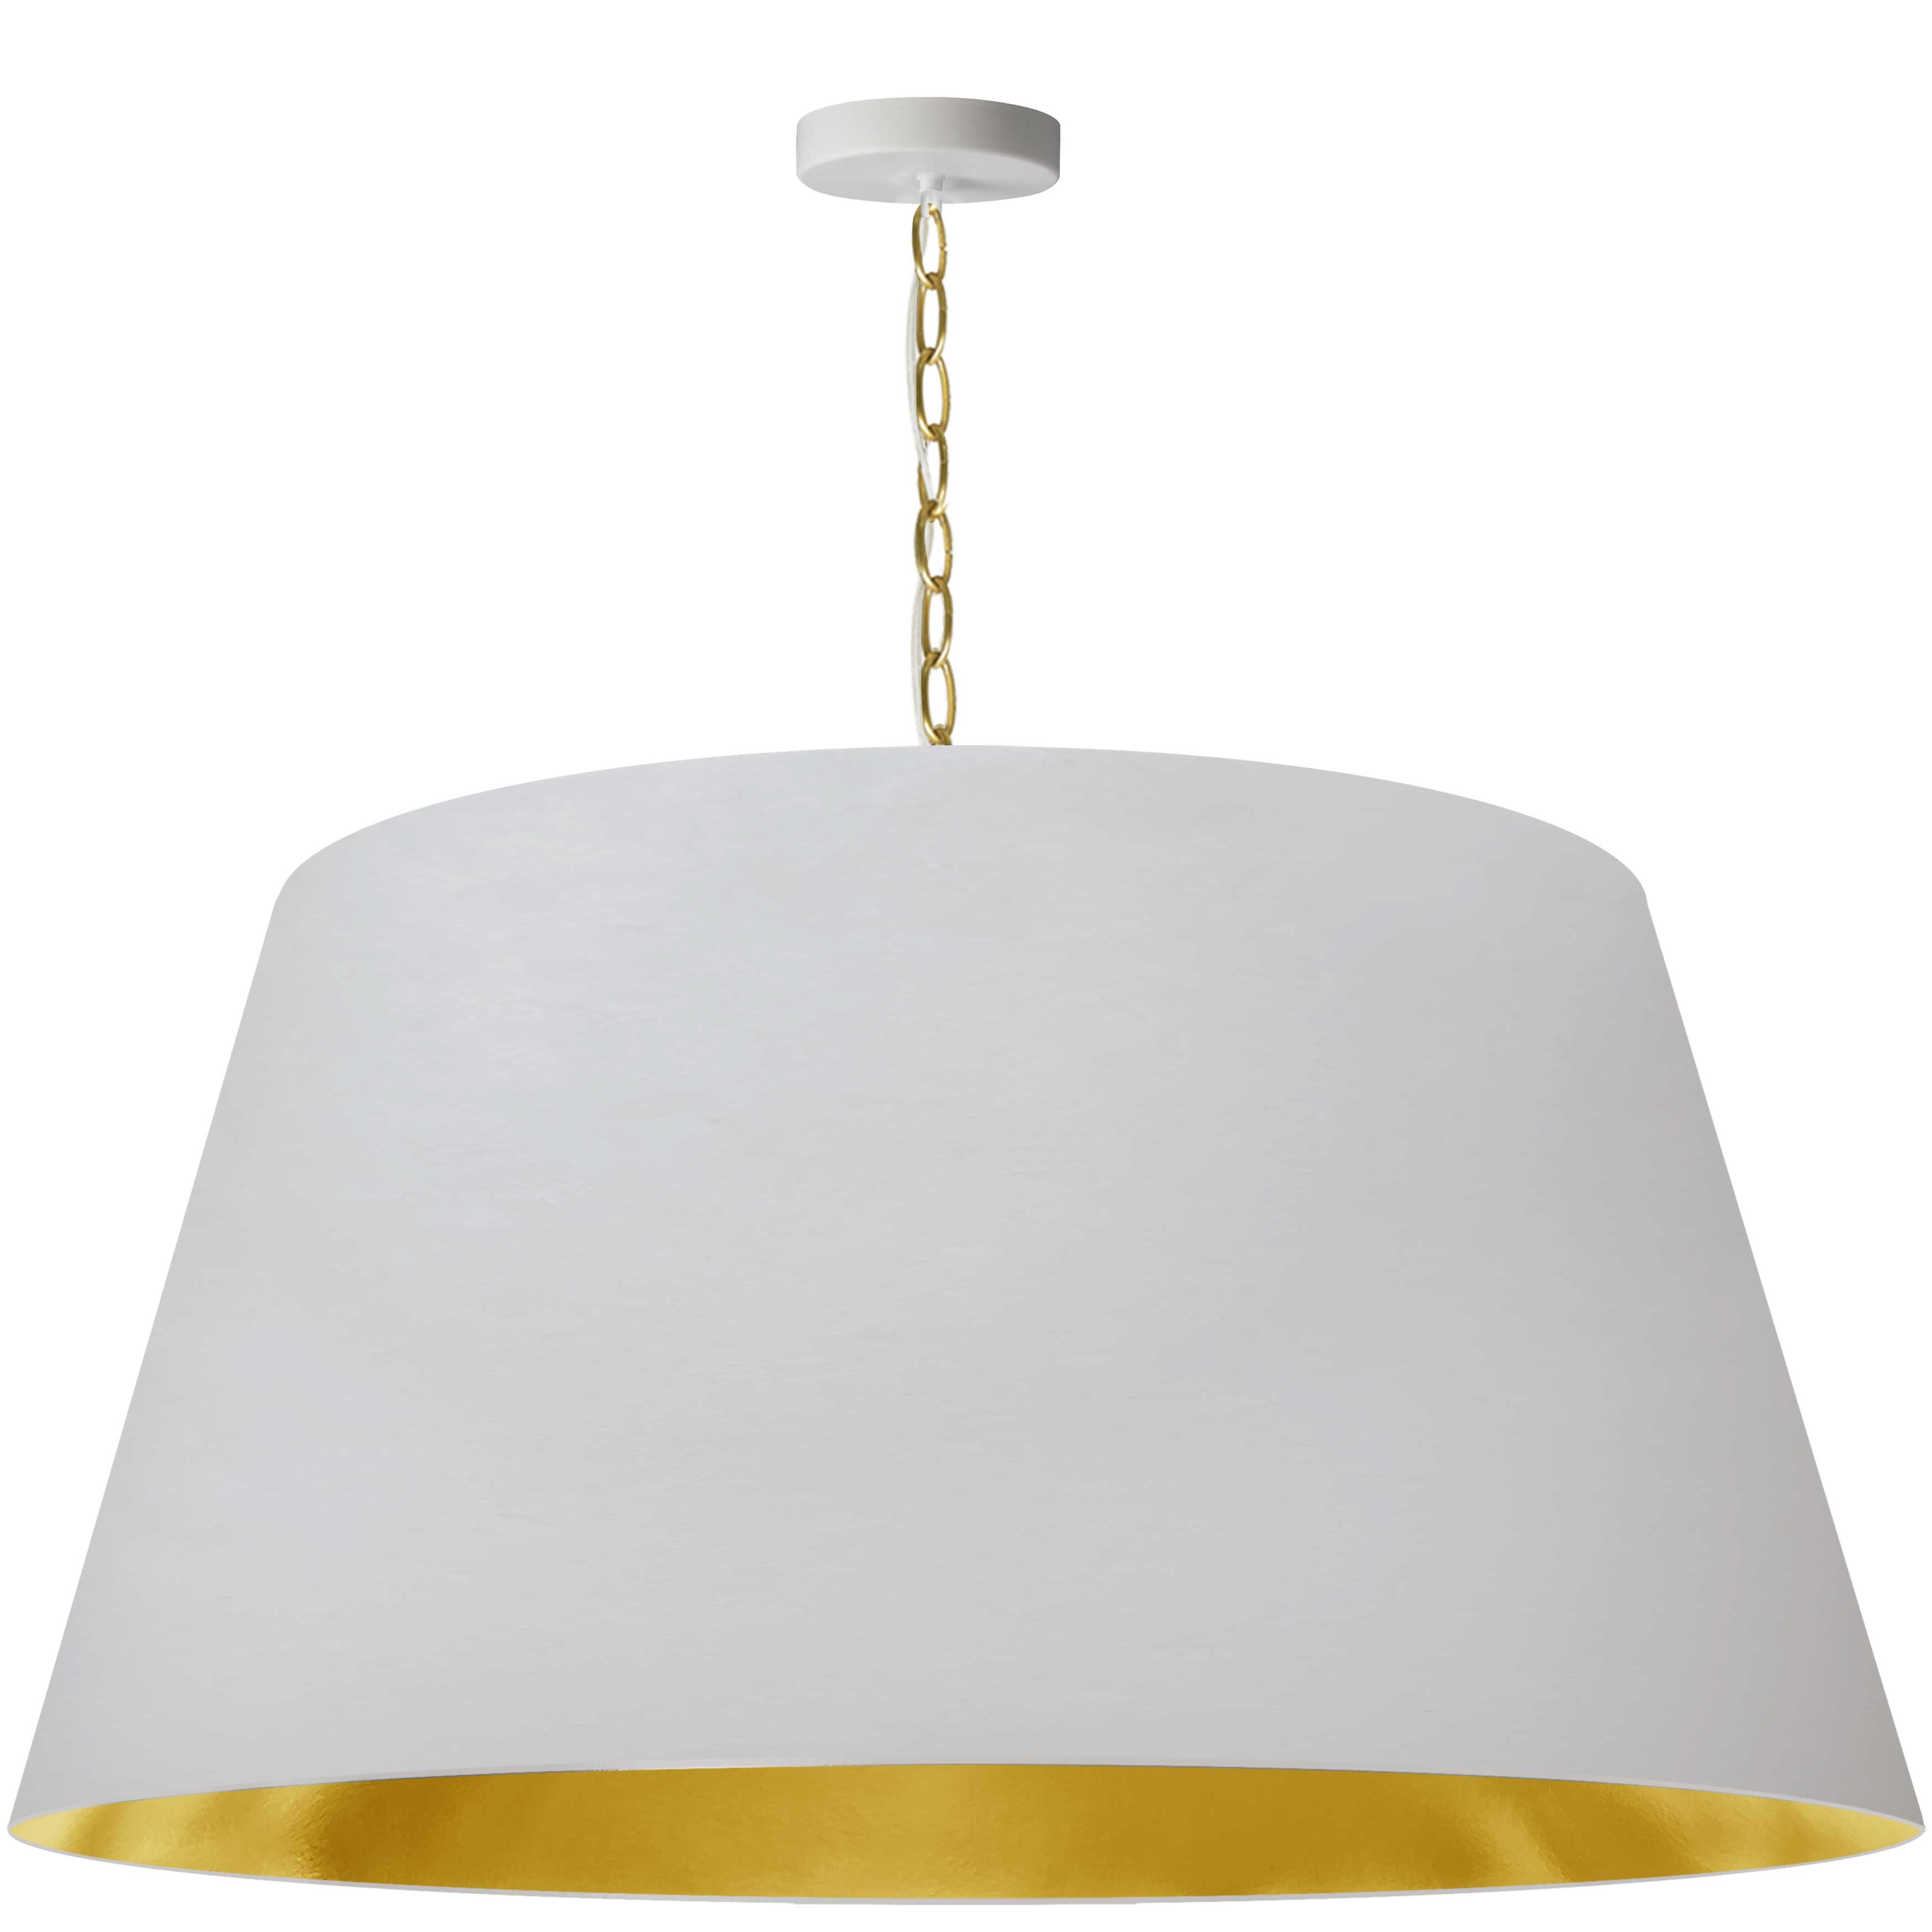 1 Light Brynn Extra Large Pendant, White/Gold Shade, Aged Brass